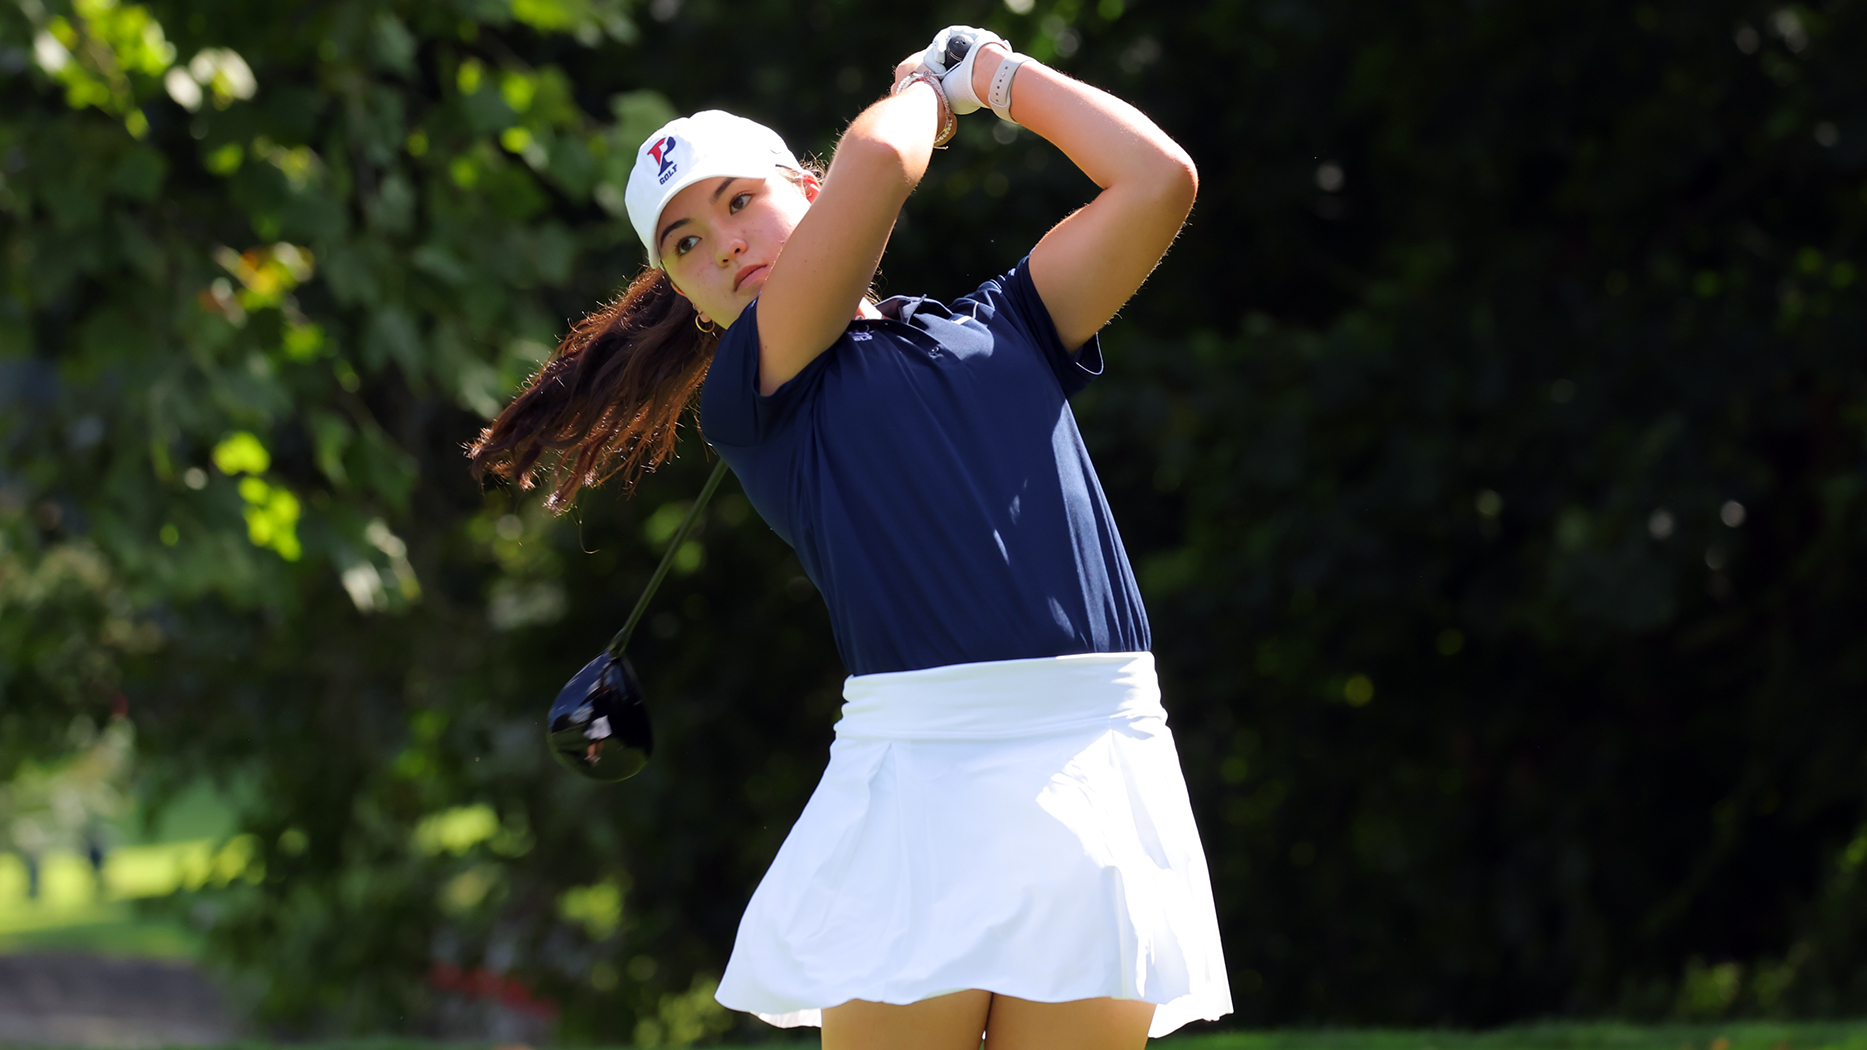 Bridget O’Keefe holds her club behind her head after finishing her swing.